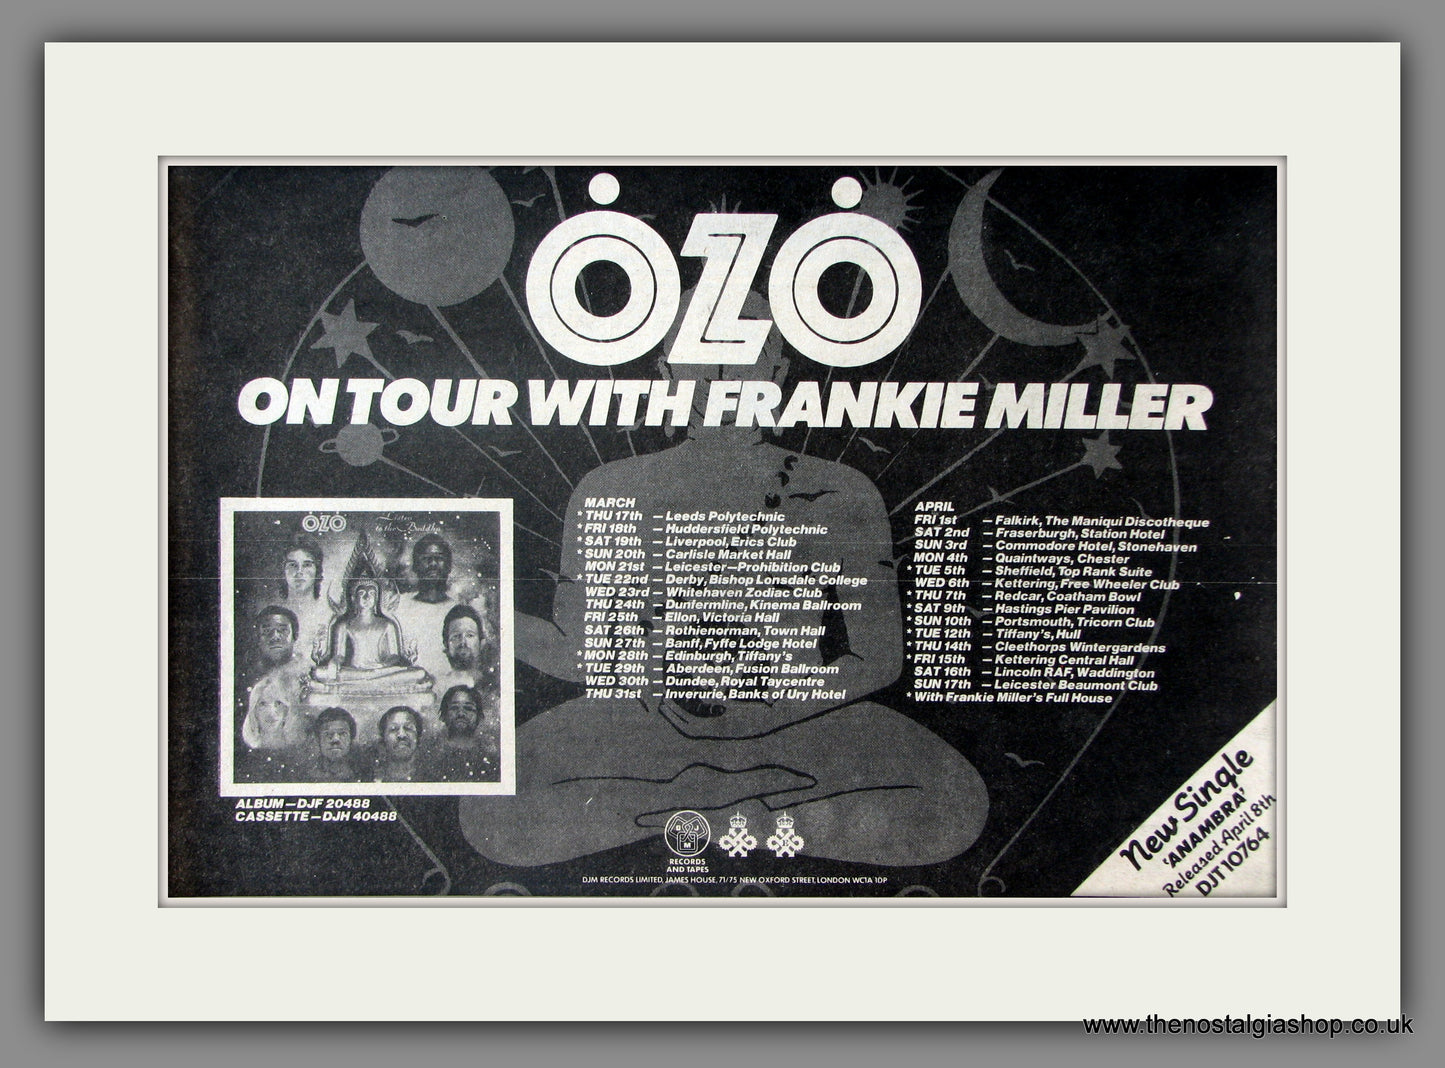 OZO On Tour With Frankie Miller. Vintage Advert 1977 (ref AD51121)